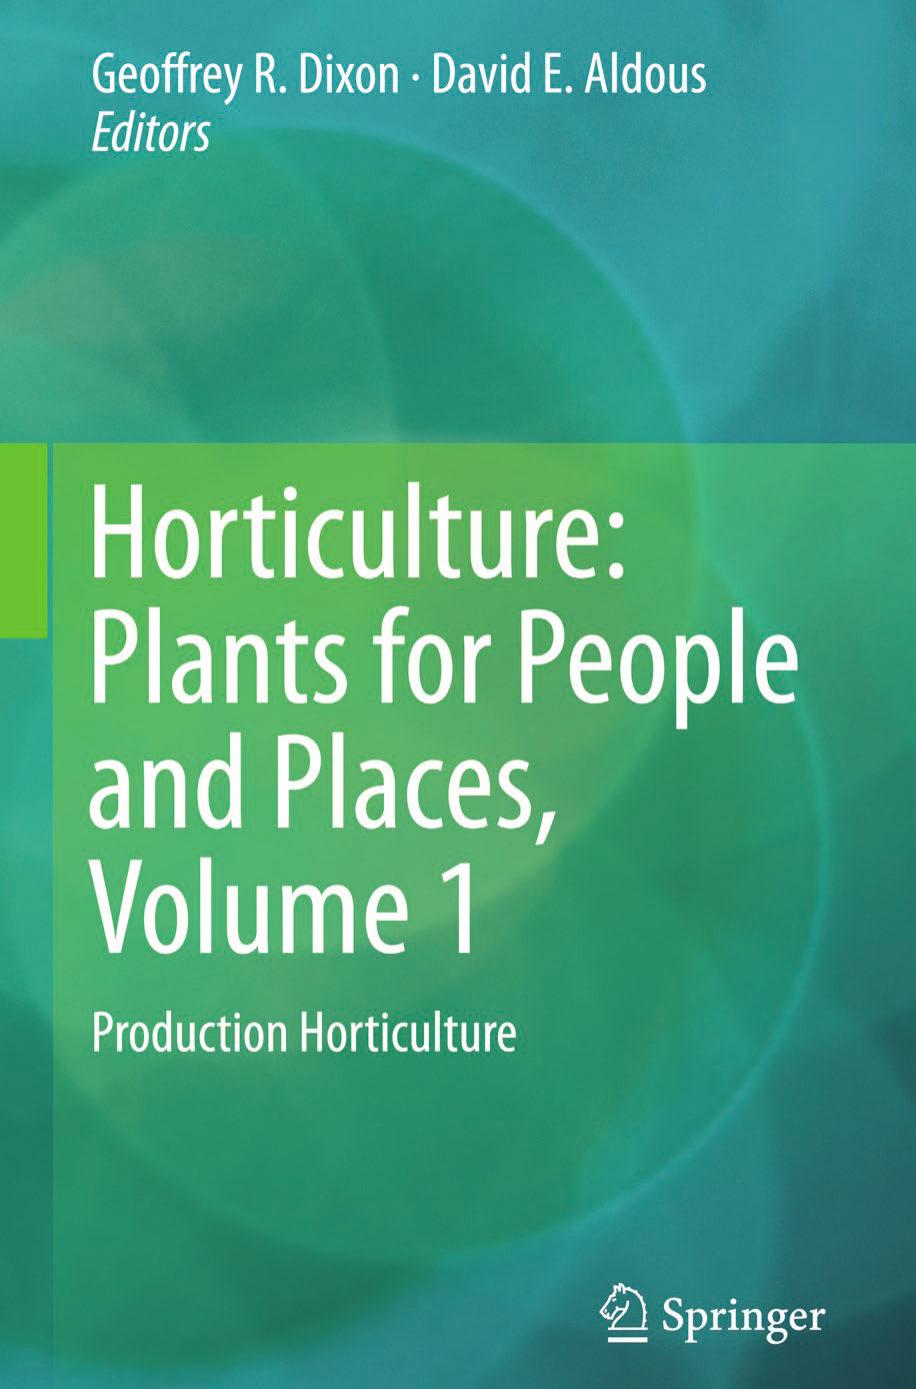 Horticulture  Plants for People and Places, Volume 1  Production Horticulture 2014